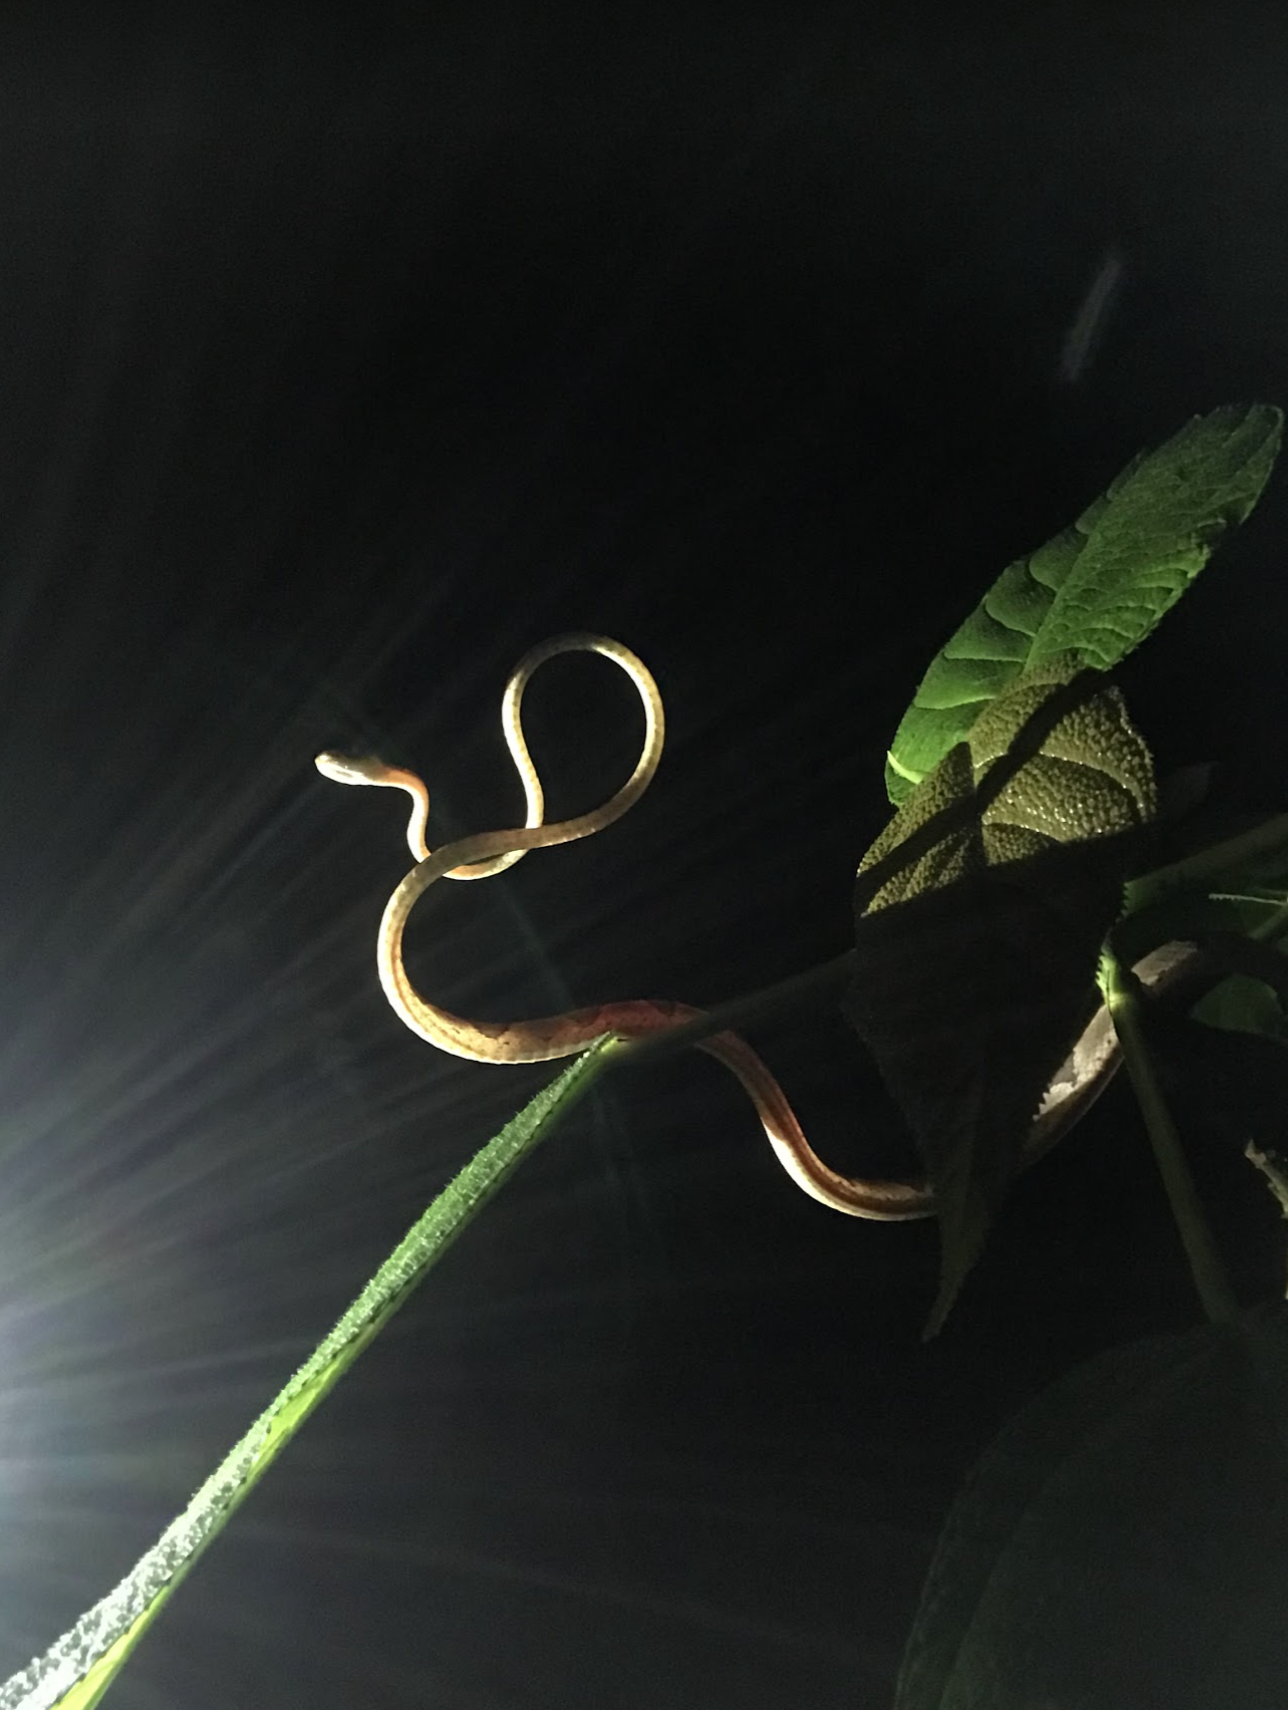 An arboreal snake spotted on a night walk through the tropical rainforest in Monteverde, Costa Rica